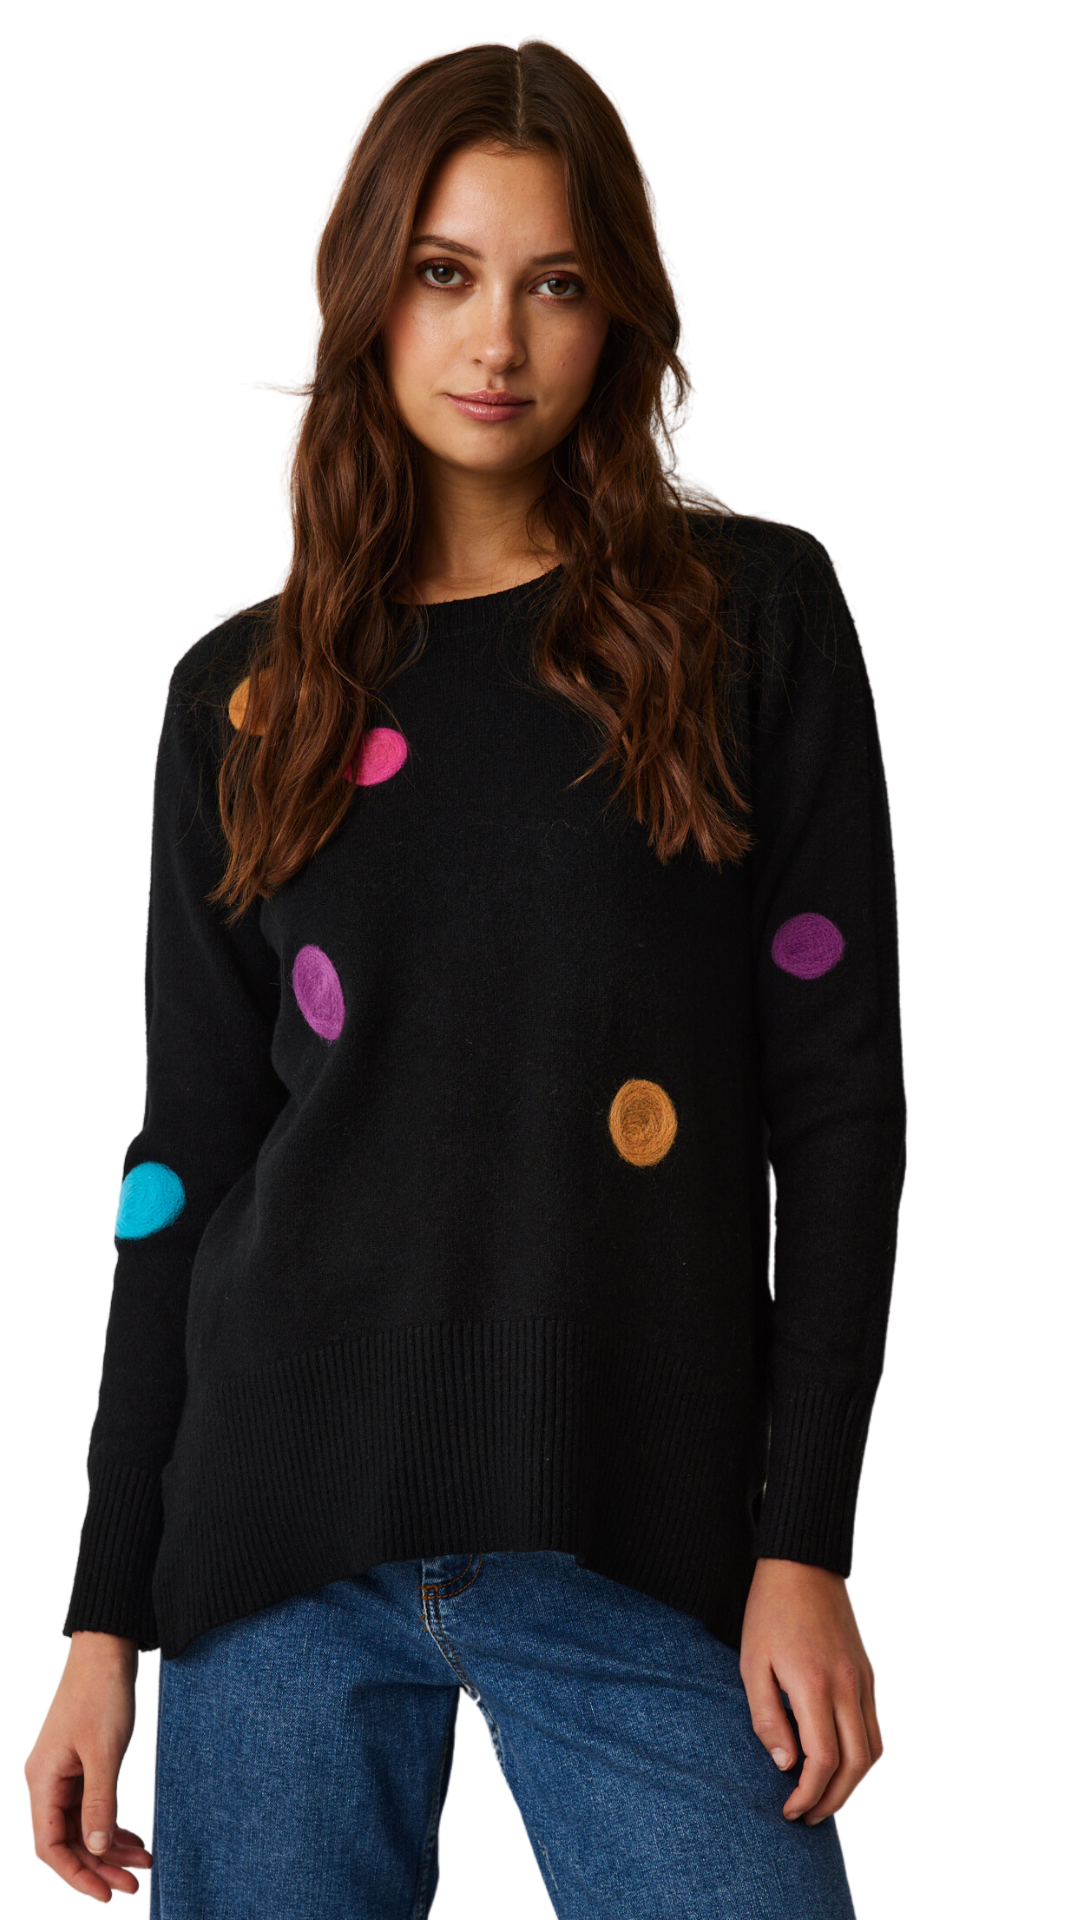 Dotty Dot High Low Sweater in Black or Jade. Style PH15682